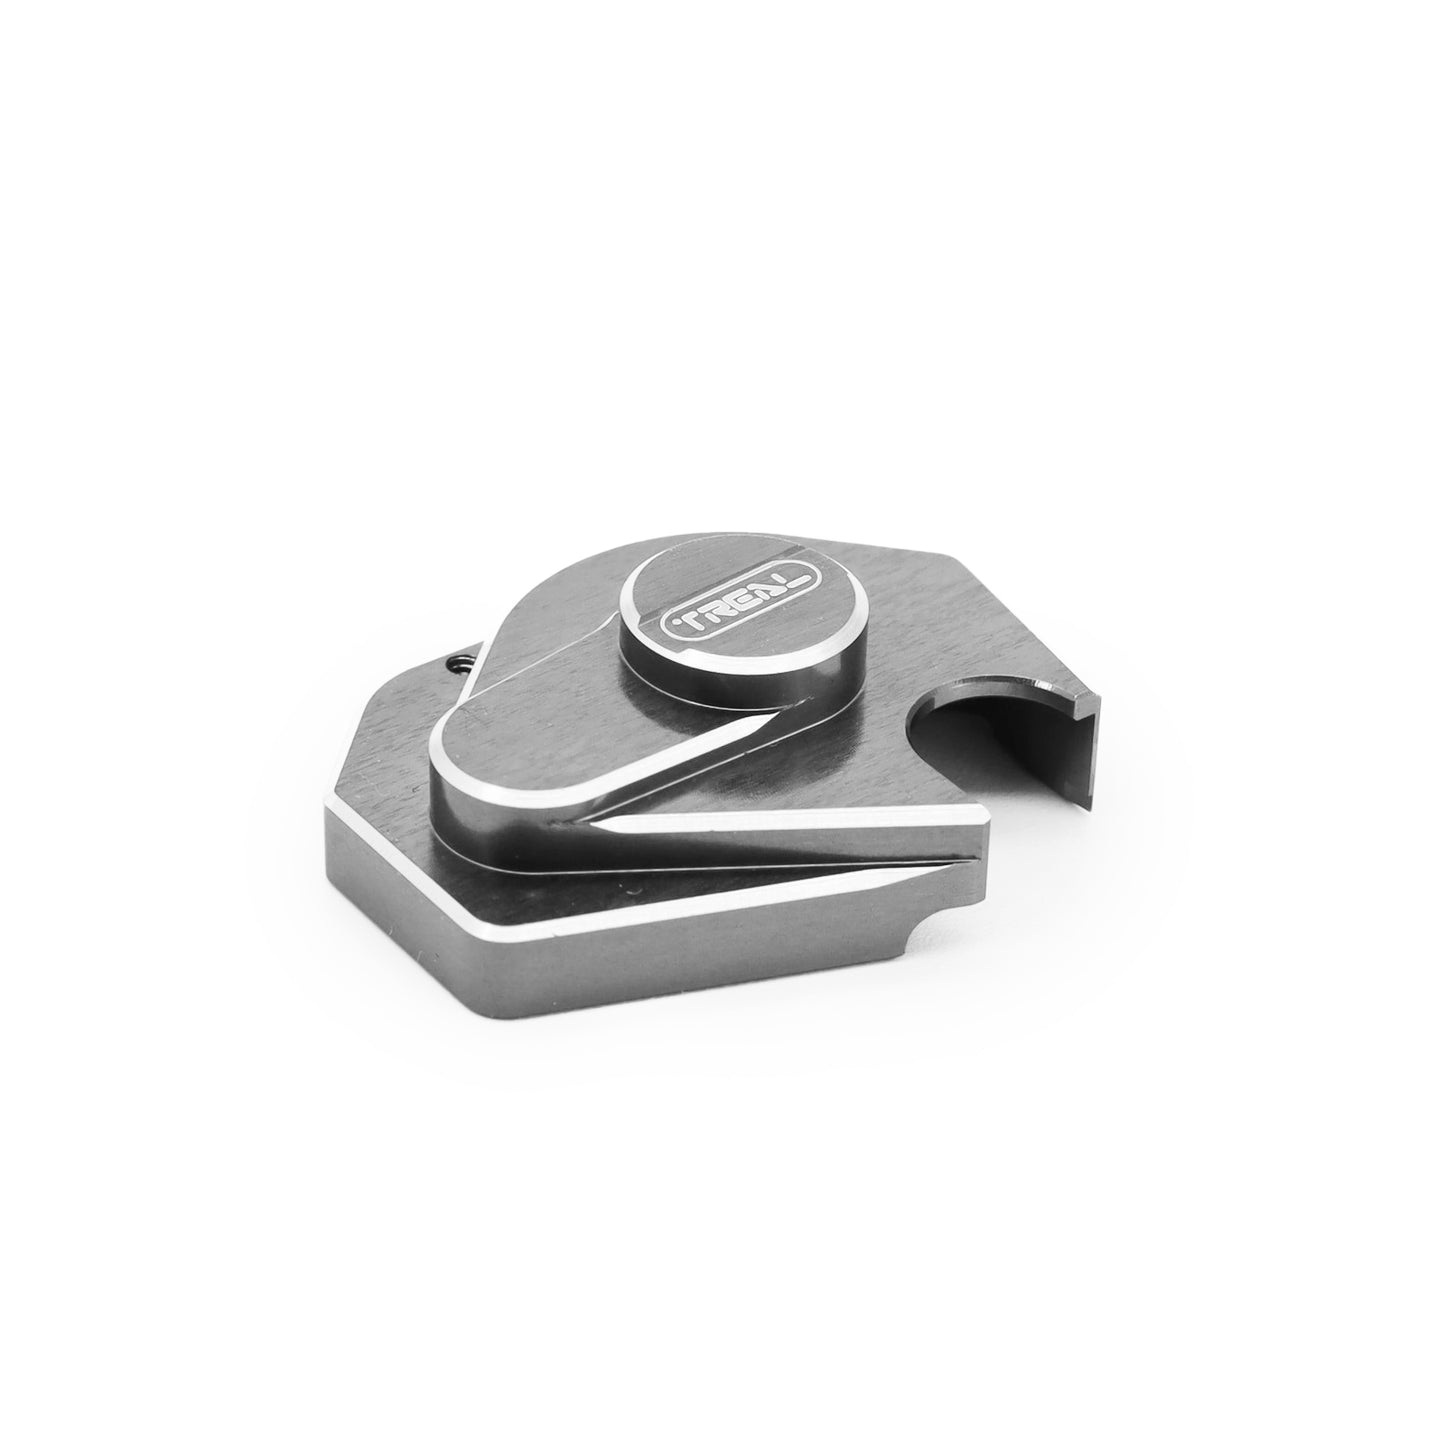 Treal Axial SCX24 Aluminum 7075 Gearbox Cover